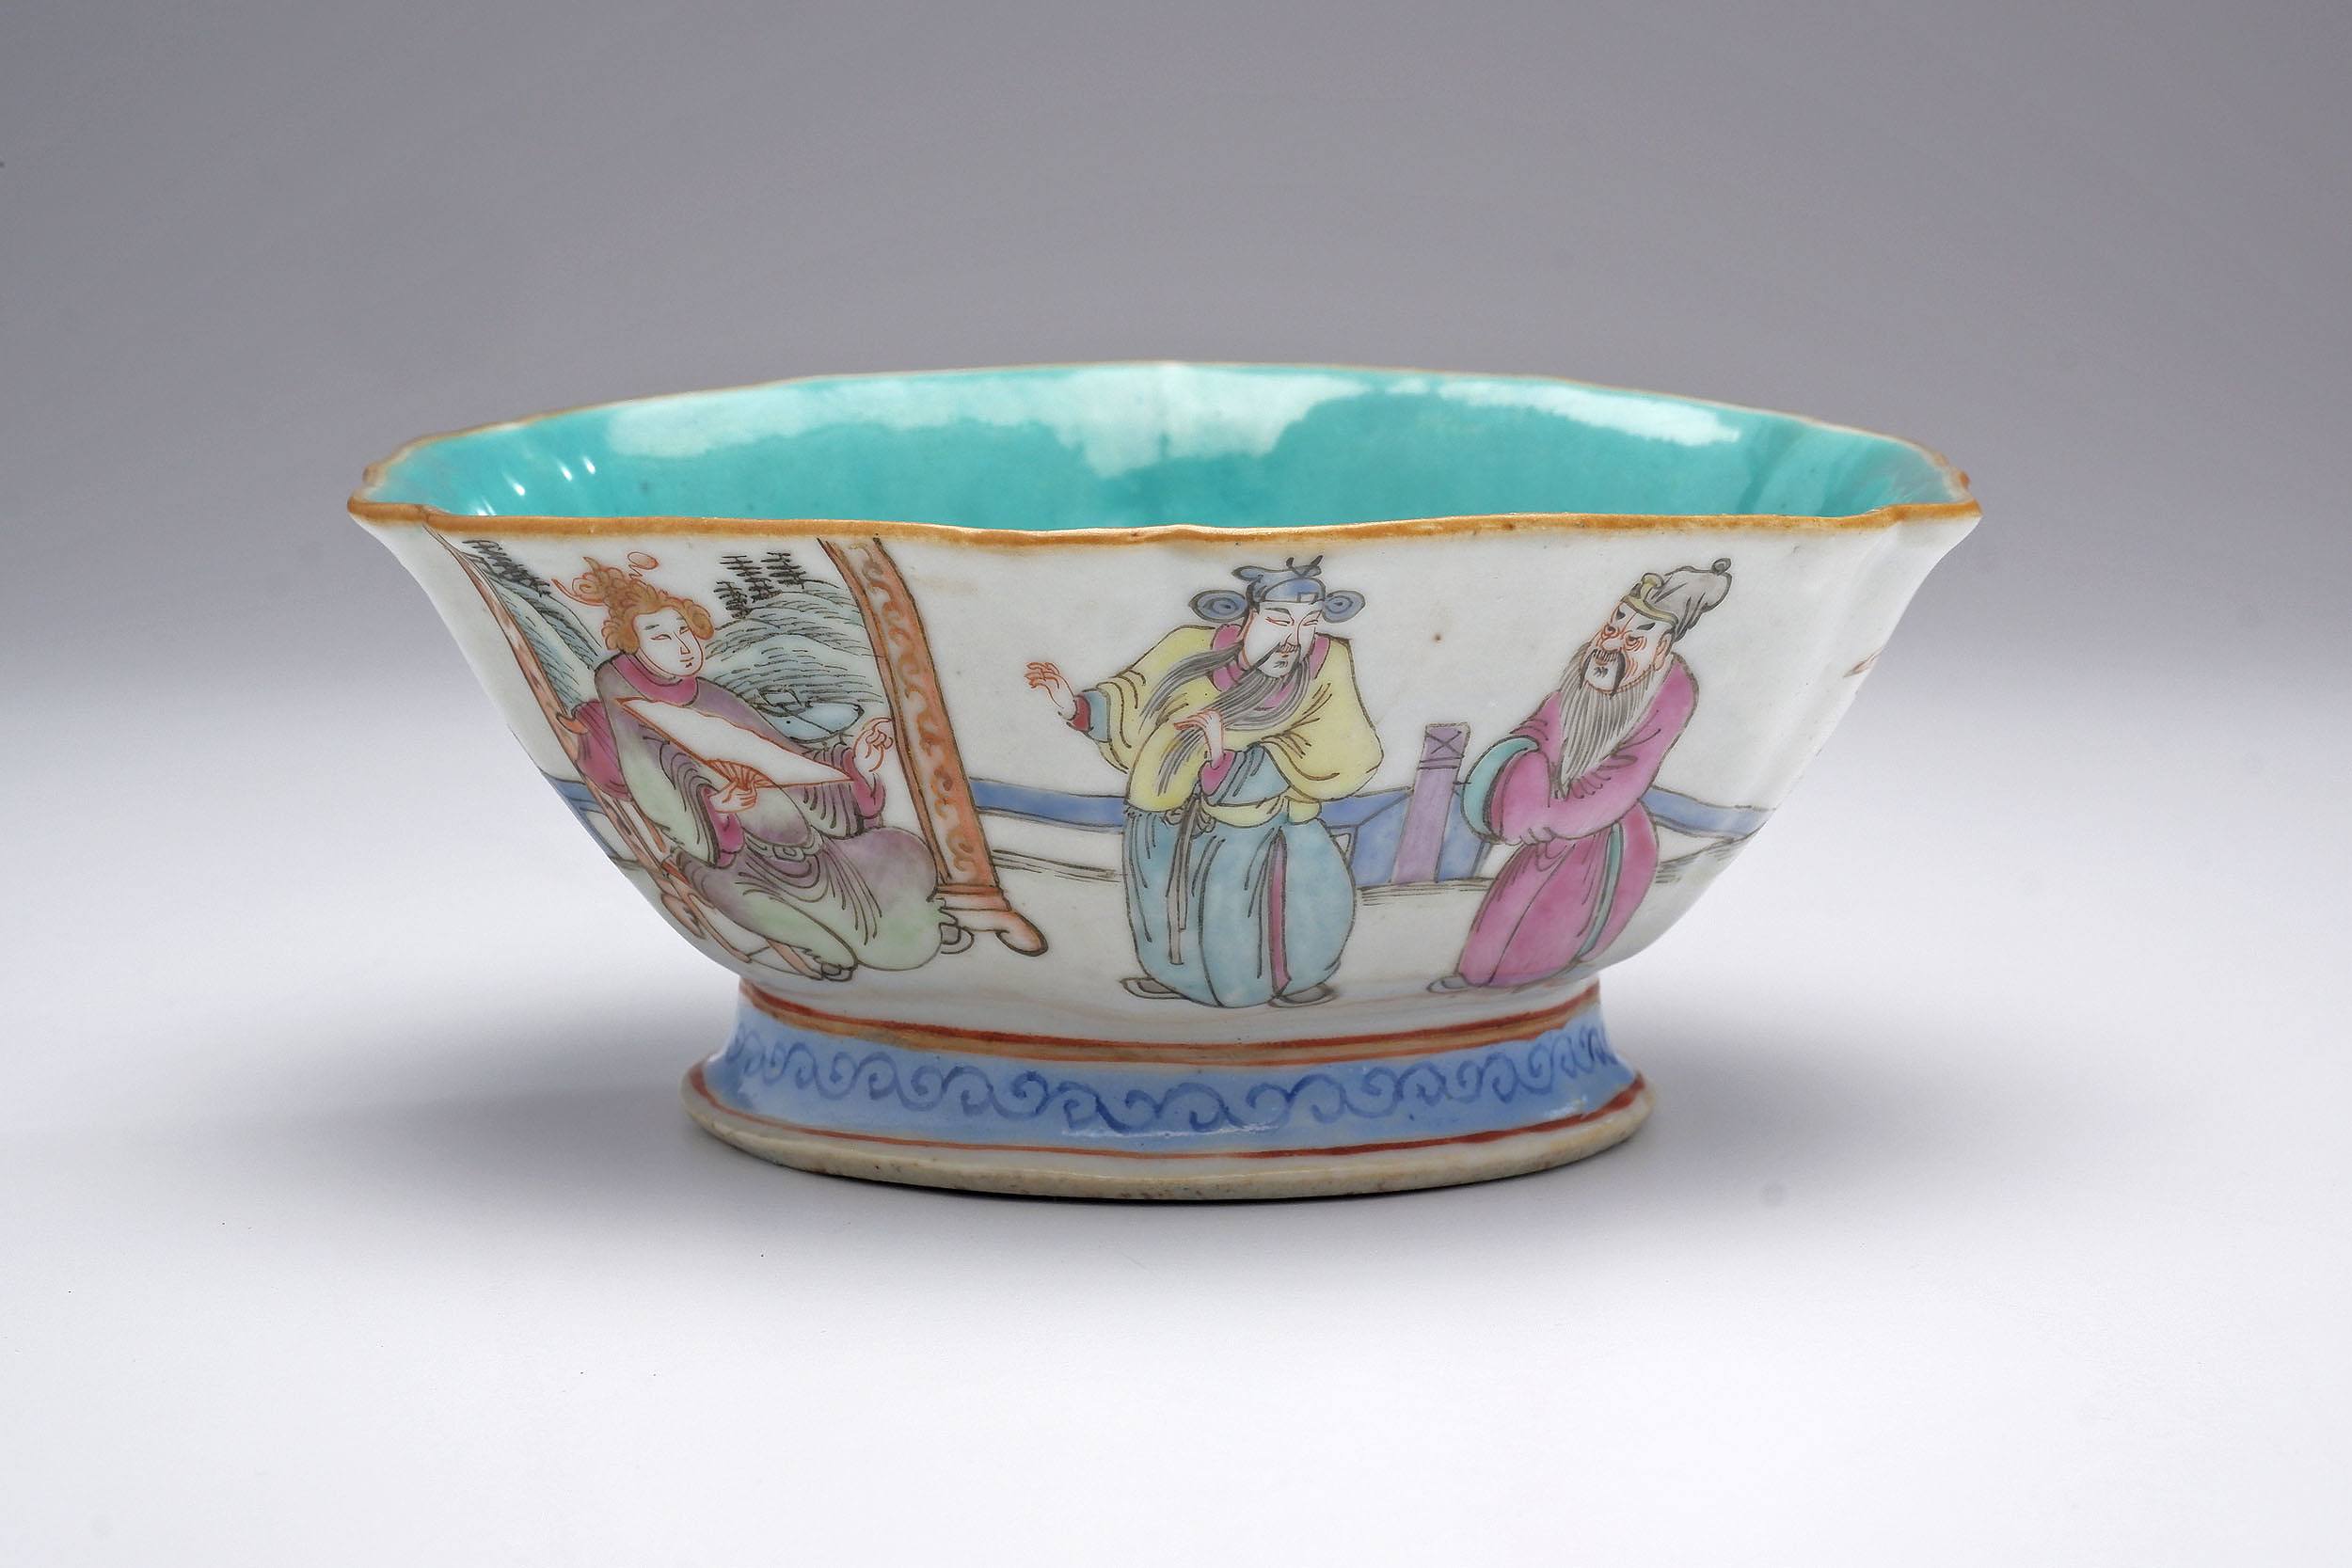 'Chinese Famille Rose Lobed Bowl with Turquoise Interior, Tongzhi Seal Mark, Late 19th Century'